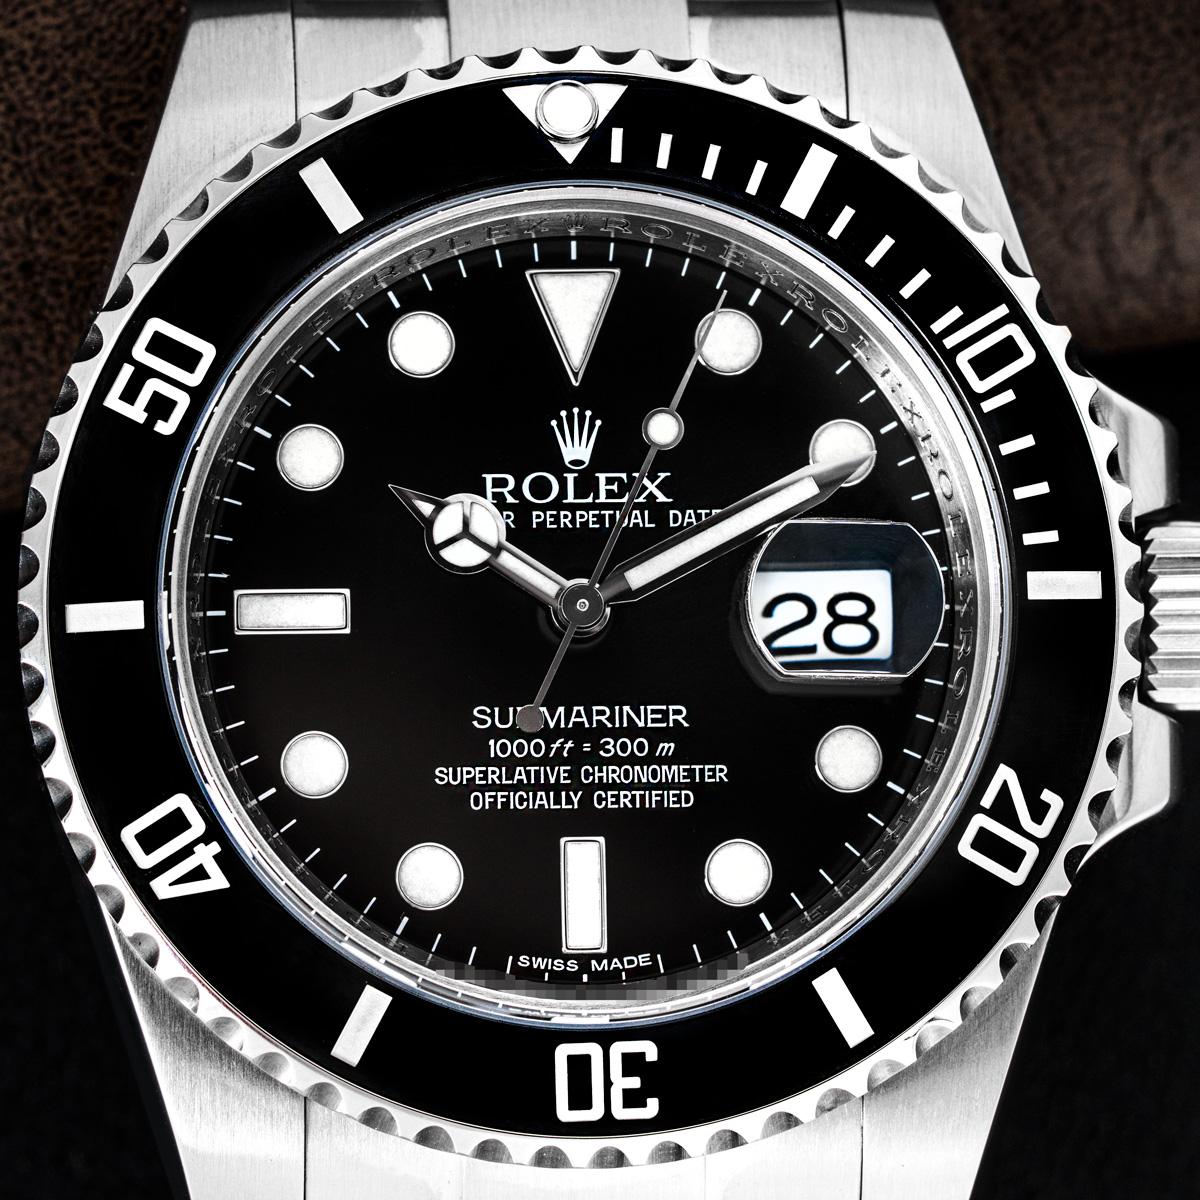 A Submariner Date in stainless steel by Rolex. Featuring a black dial, a date aperture and a uni-directional rotatable bezel with 60-minute graduations. Fitted with an Oyster bracelet and an Oysterlock deployant clasp. The watch also features a